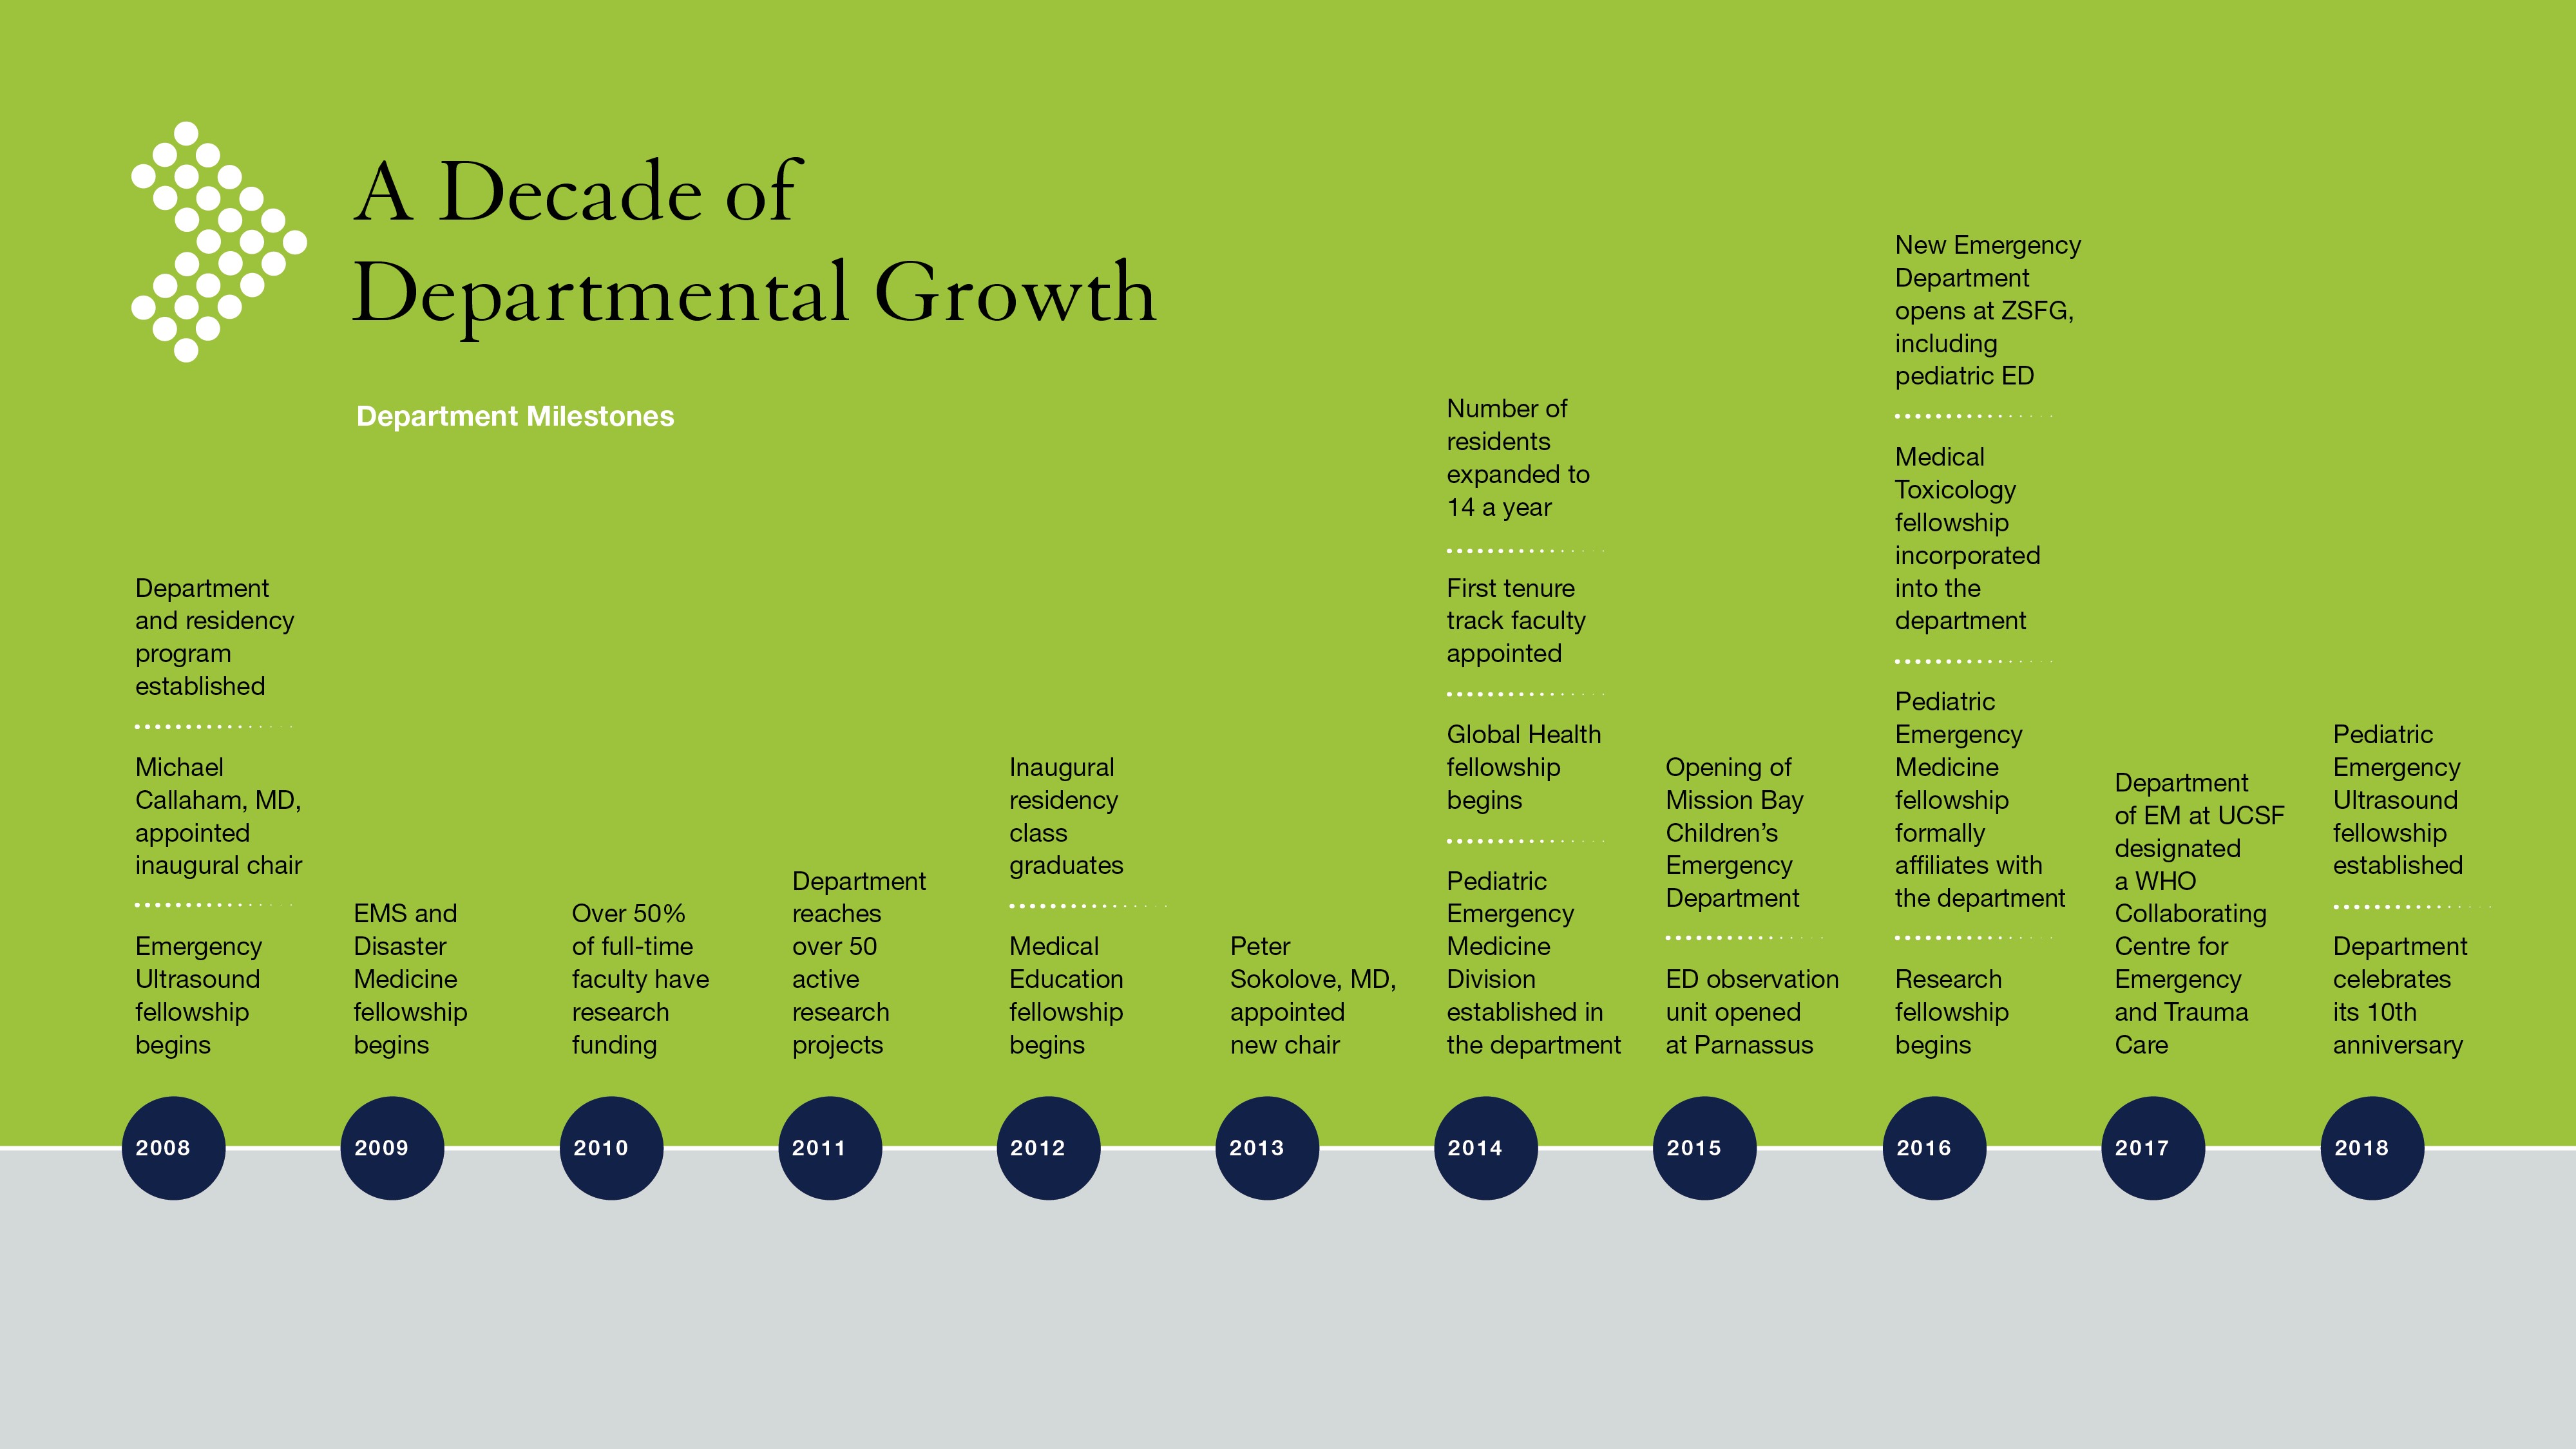 A Decade of Departmental Growth timeline